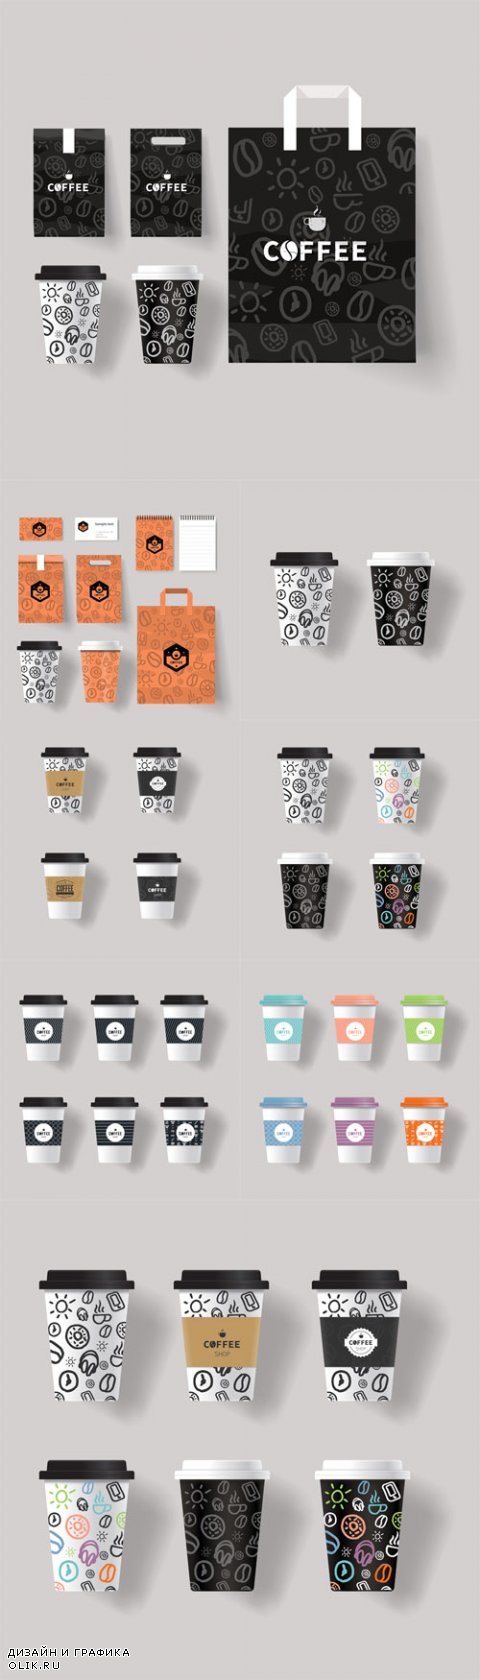 Vector Coffee Shop Branding Mock up with Coffee Cup and Package Design Template